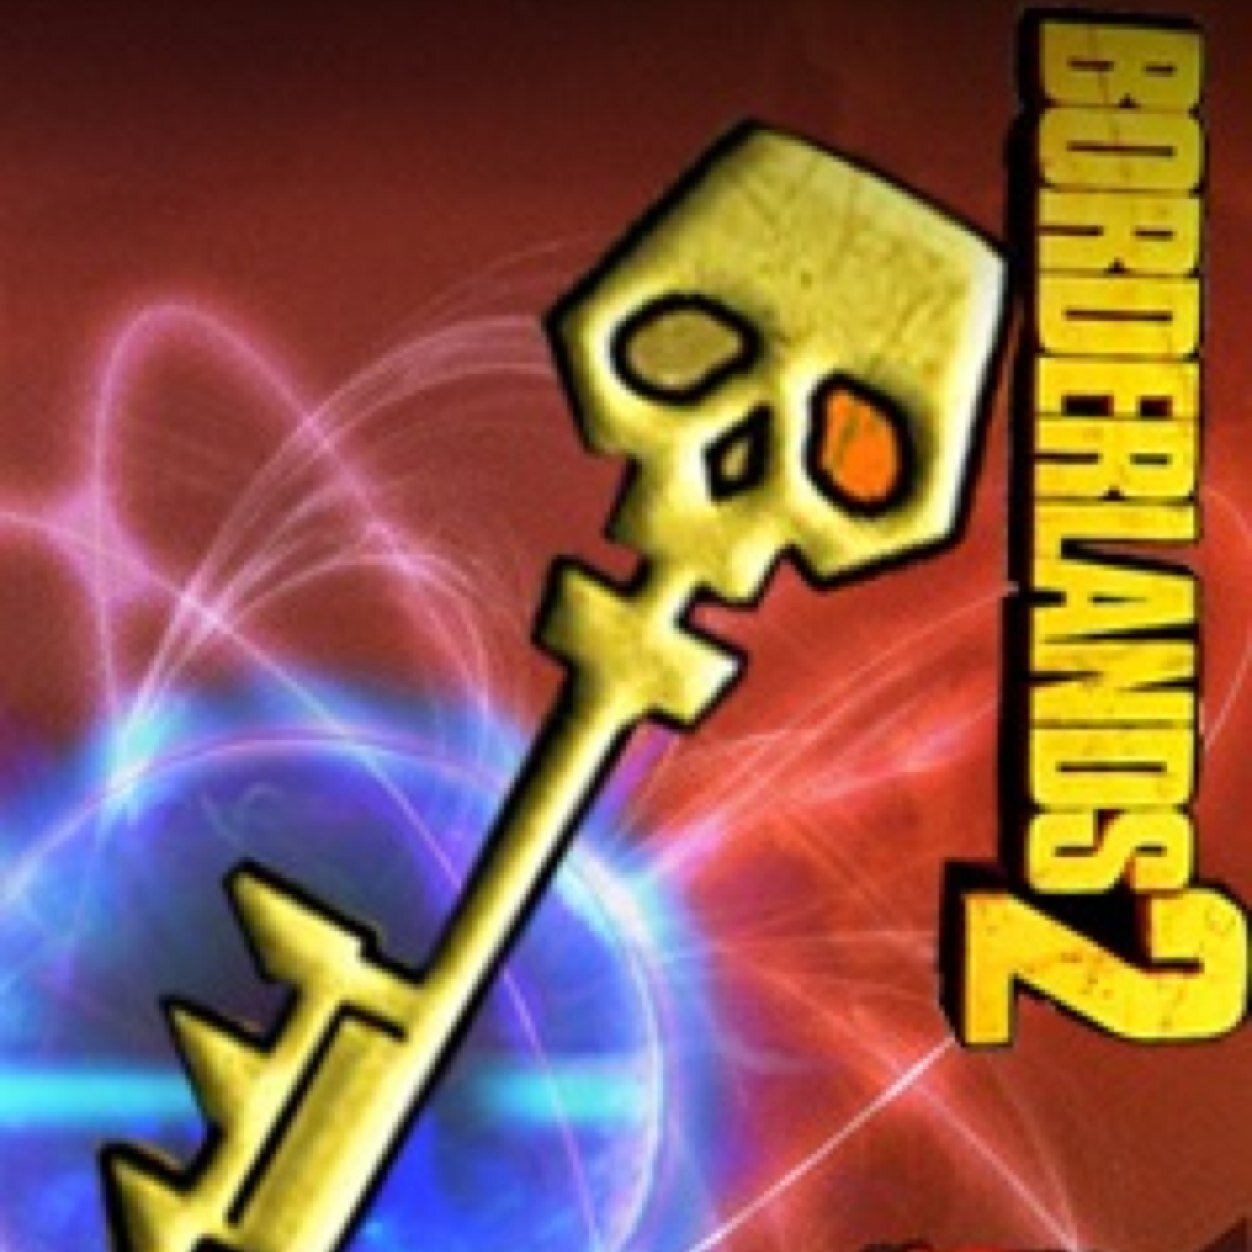 Welcome! This page will give out borderlands 2 golden keys and weapon mods. Follow me to keep up to date with golden keys.